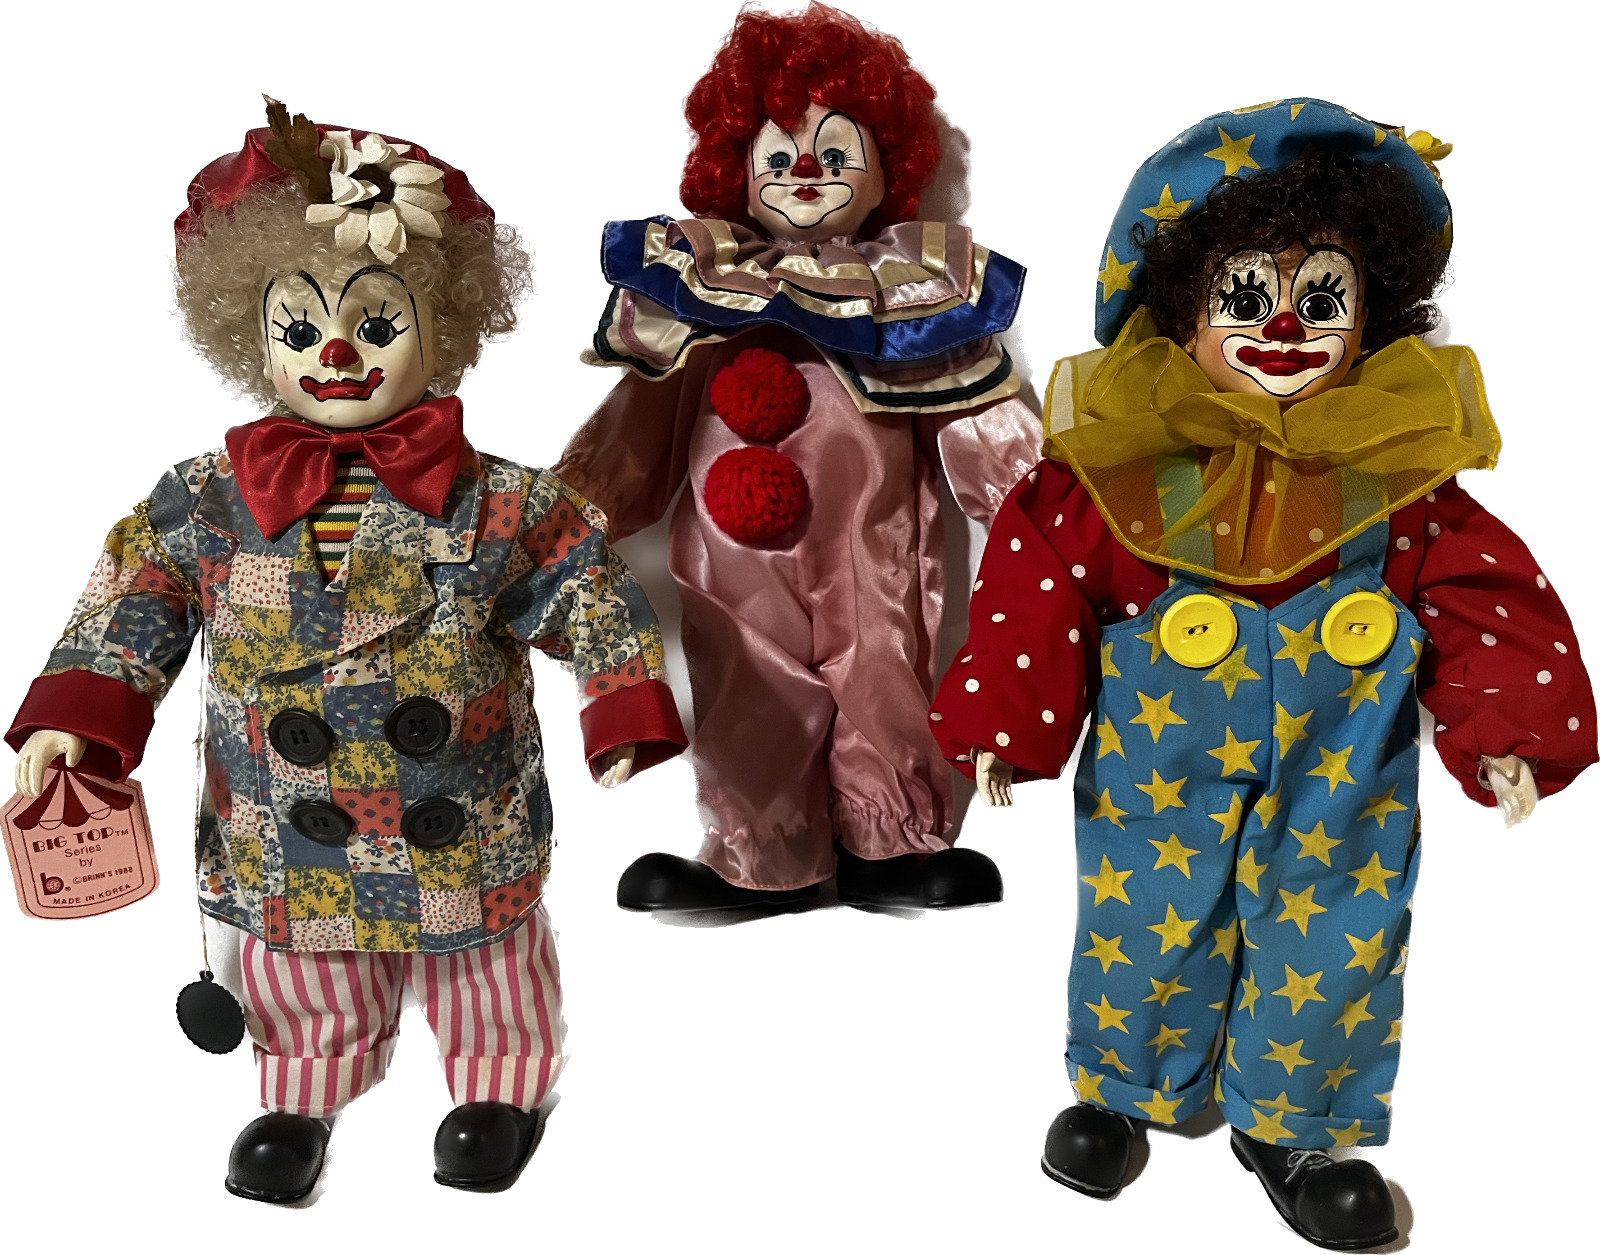 Big Top Series by Brinn\'s 1988 Clowns/Collectible Edition/Set of 3